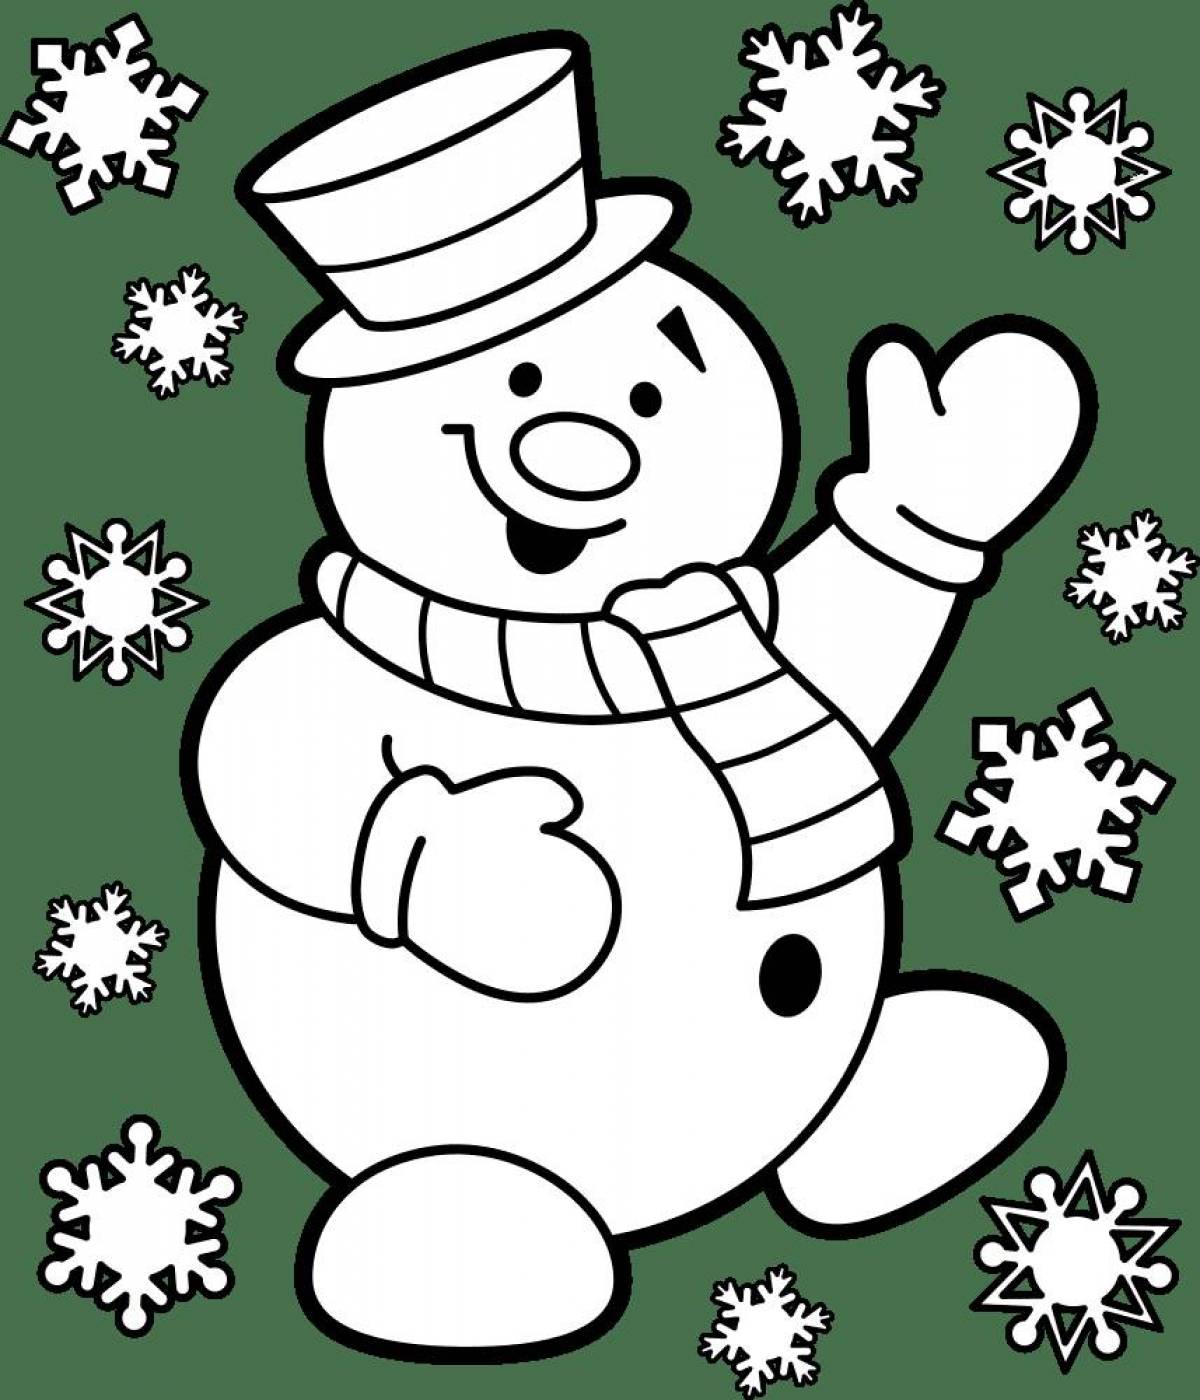 Whimsical snowman coloring book for kids